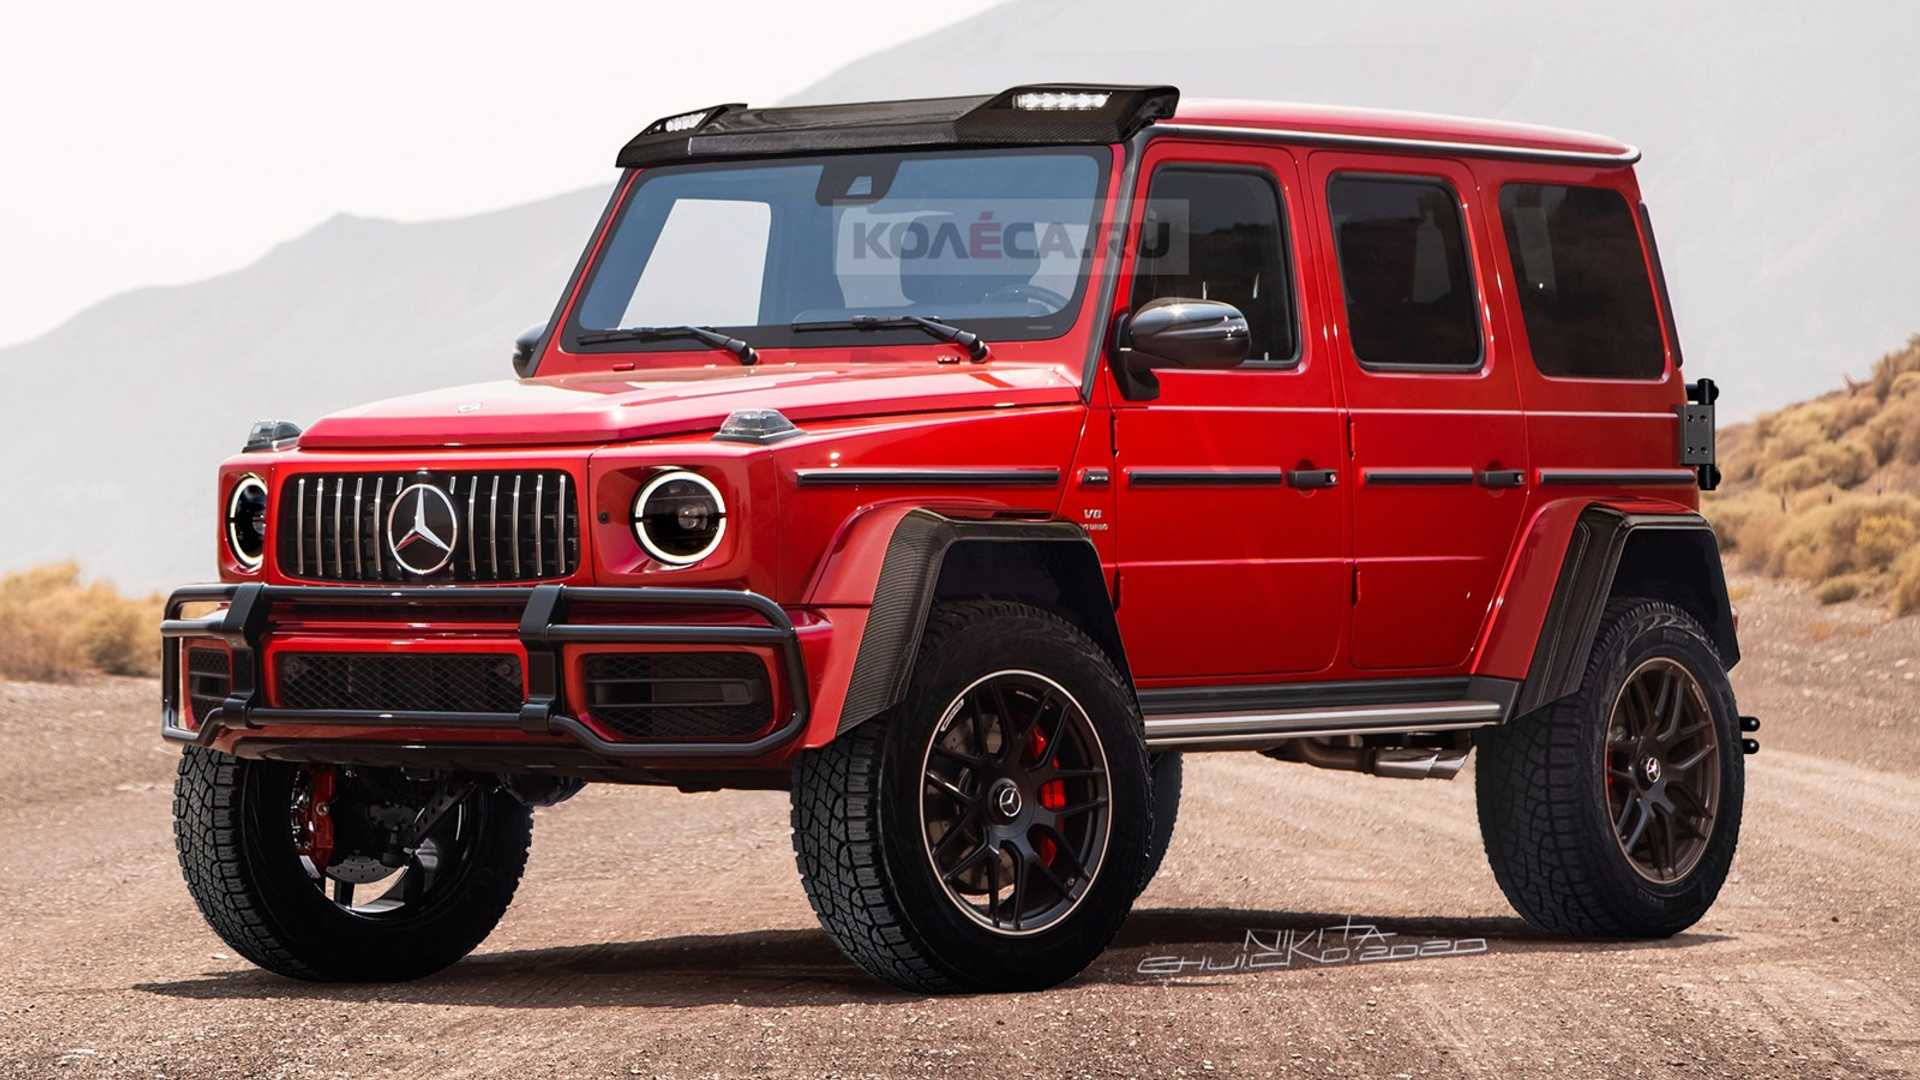 22 Mercedes Benz G 550 4x4 Squared Looks Real In Accurate Rendering Autoevolution